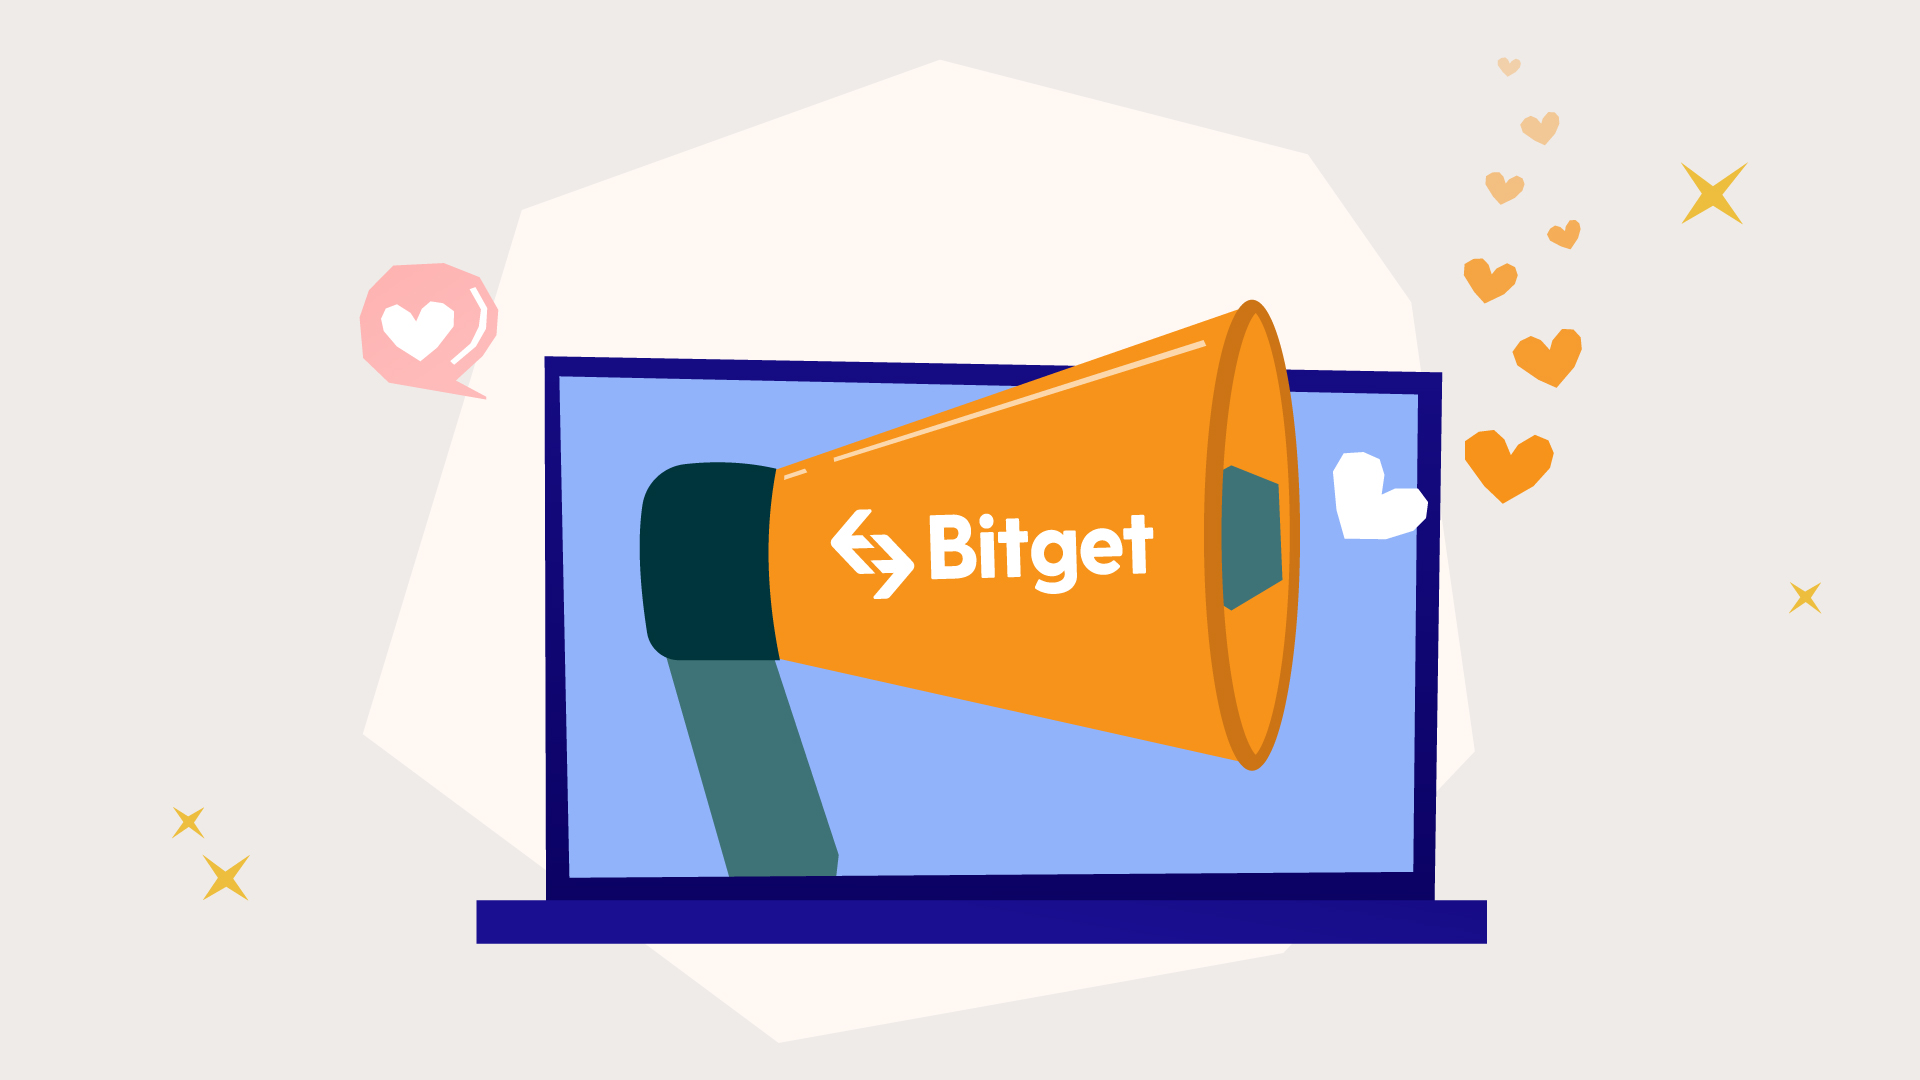 Cointraffic Press Release Service for Bitget - Targeting the English-speaking markets